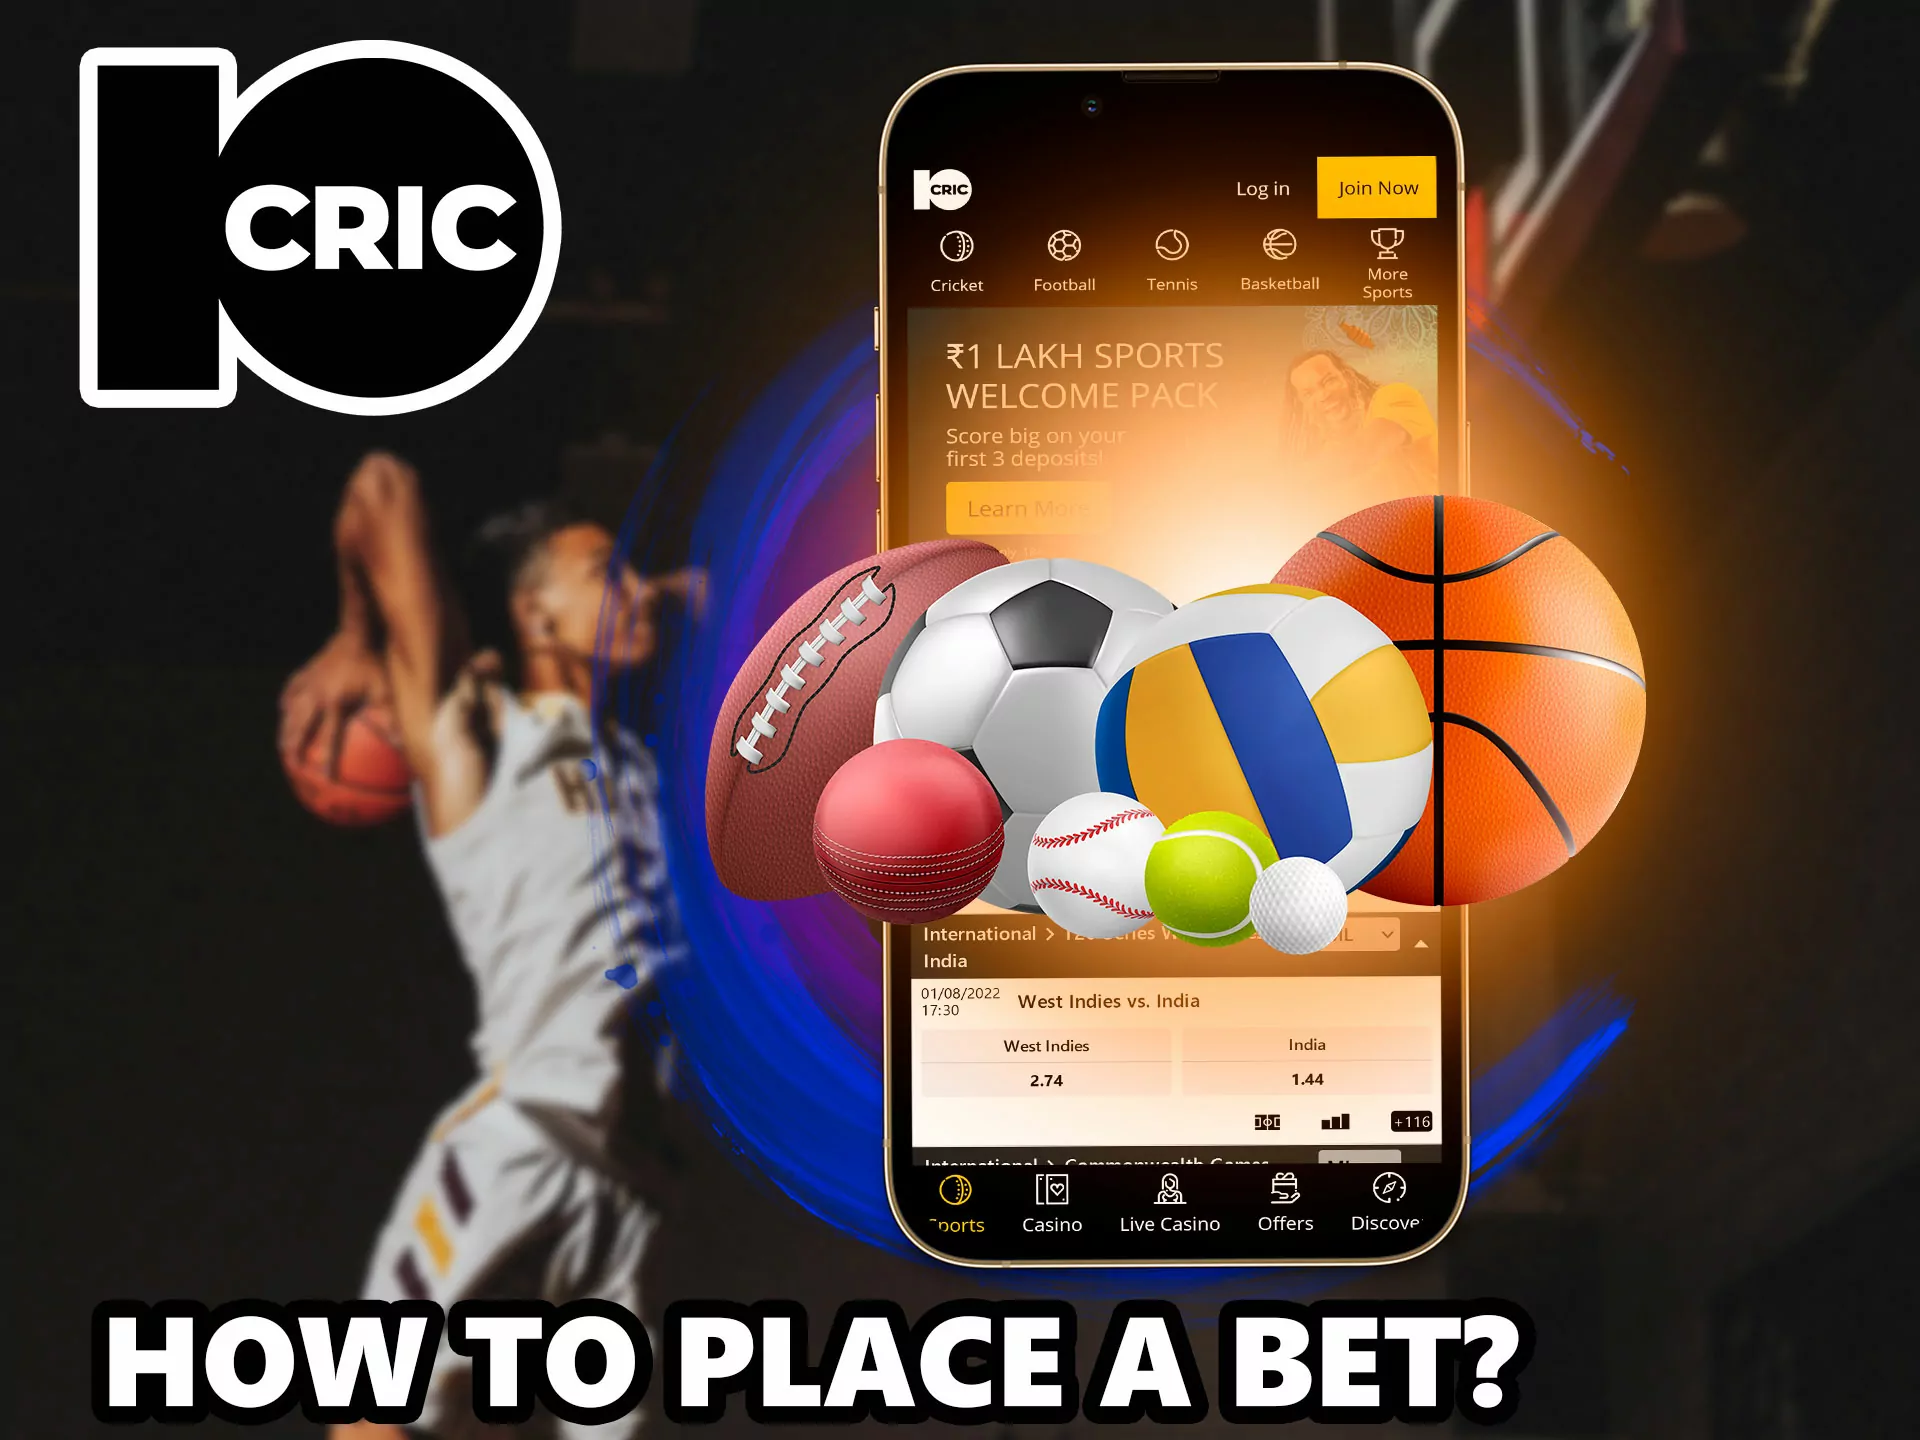 It is not always immediately clear for a beginner how to place a bet, our guide will help new users.